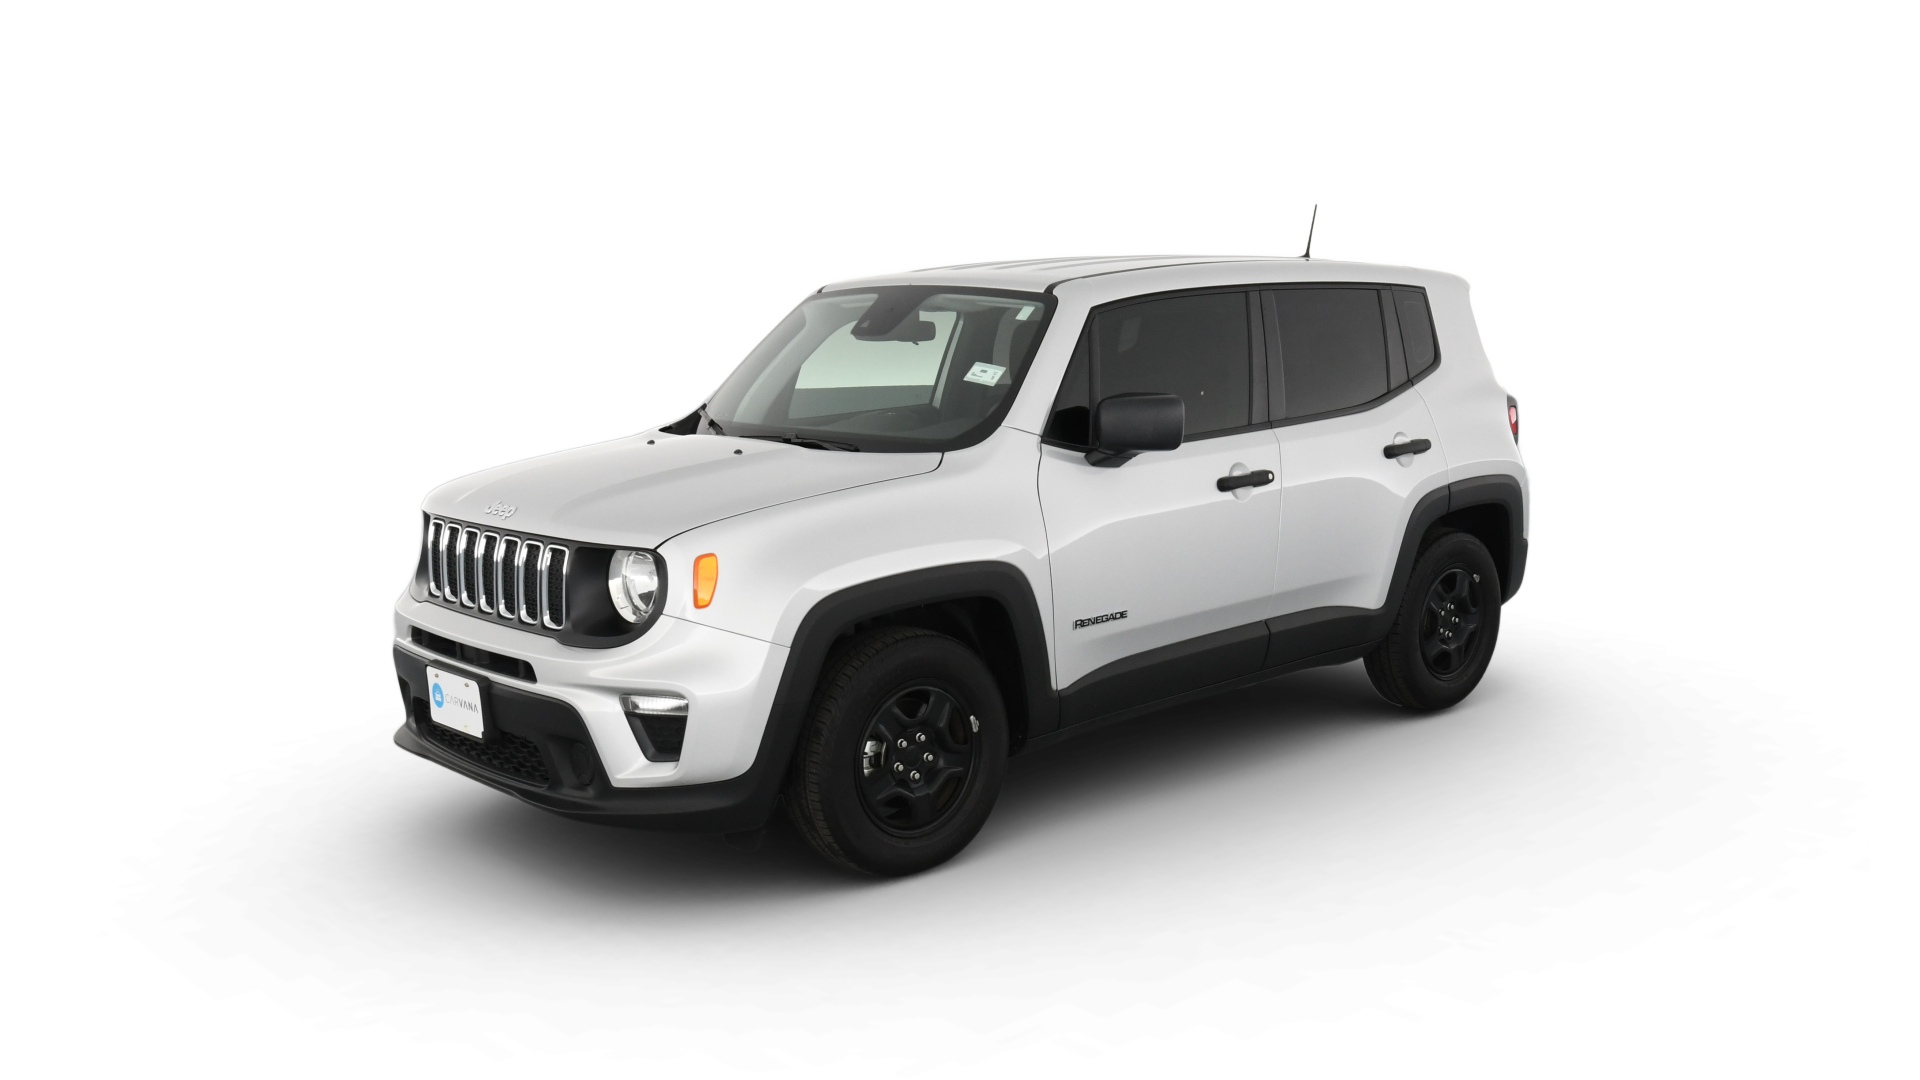 https://vexstockimages.fastly.carvana.io/stockimages/2021_JEEP_RENEGADE_SPORT%20SUV%204D_SILVER_stock_desktop_1920x1080.png?v=1661543964.980